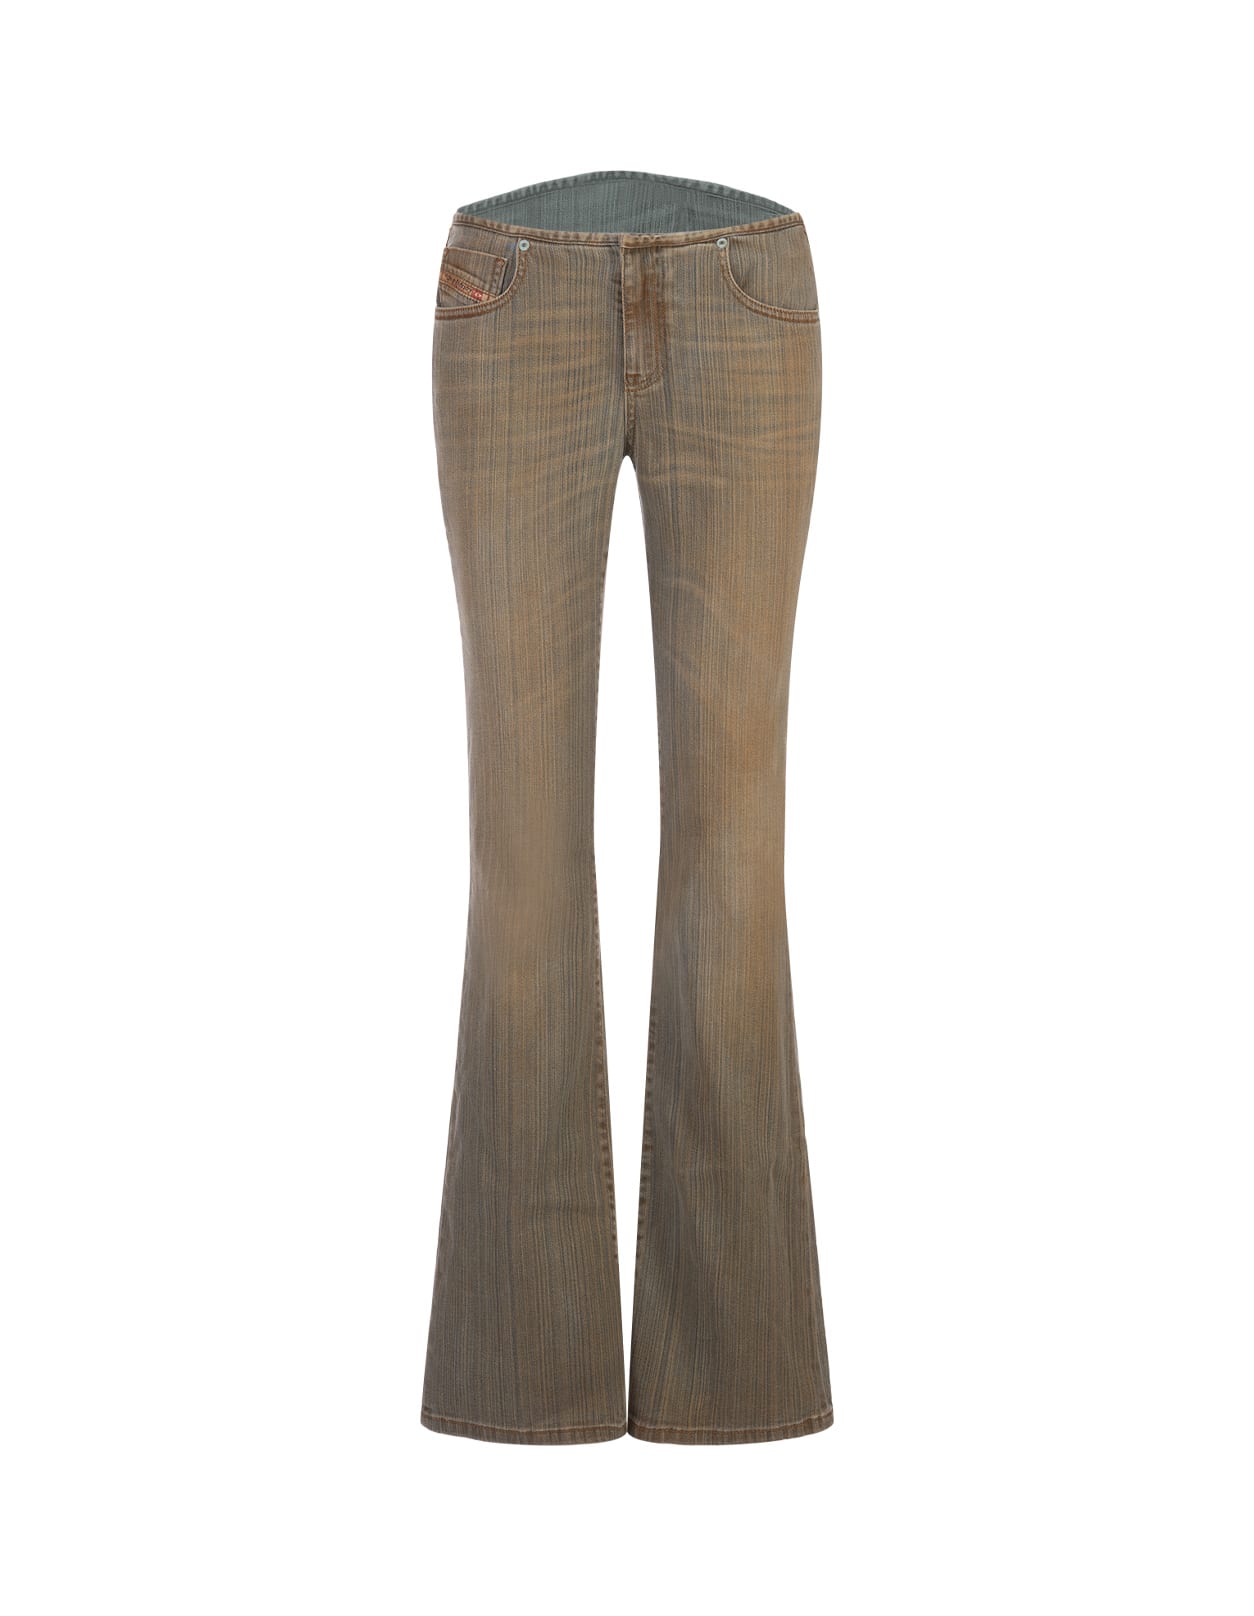 Diesel Bootcut And Flare Jeans 1969 D-ebbey 0nlau